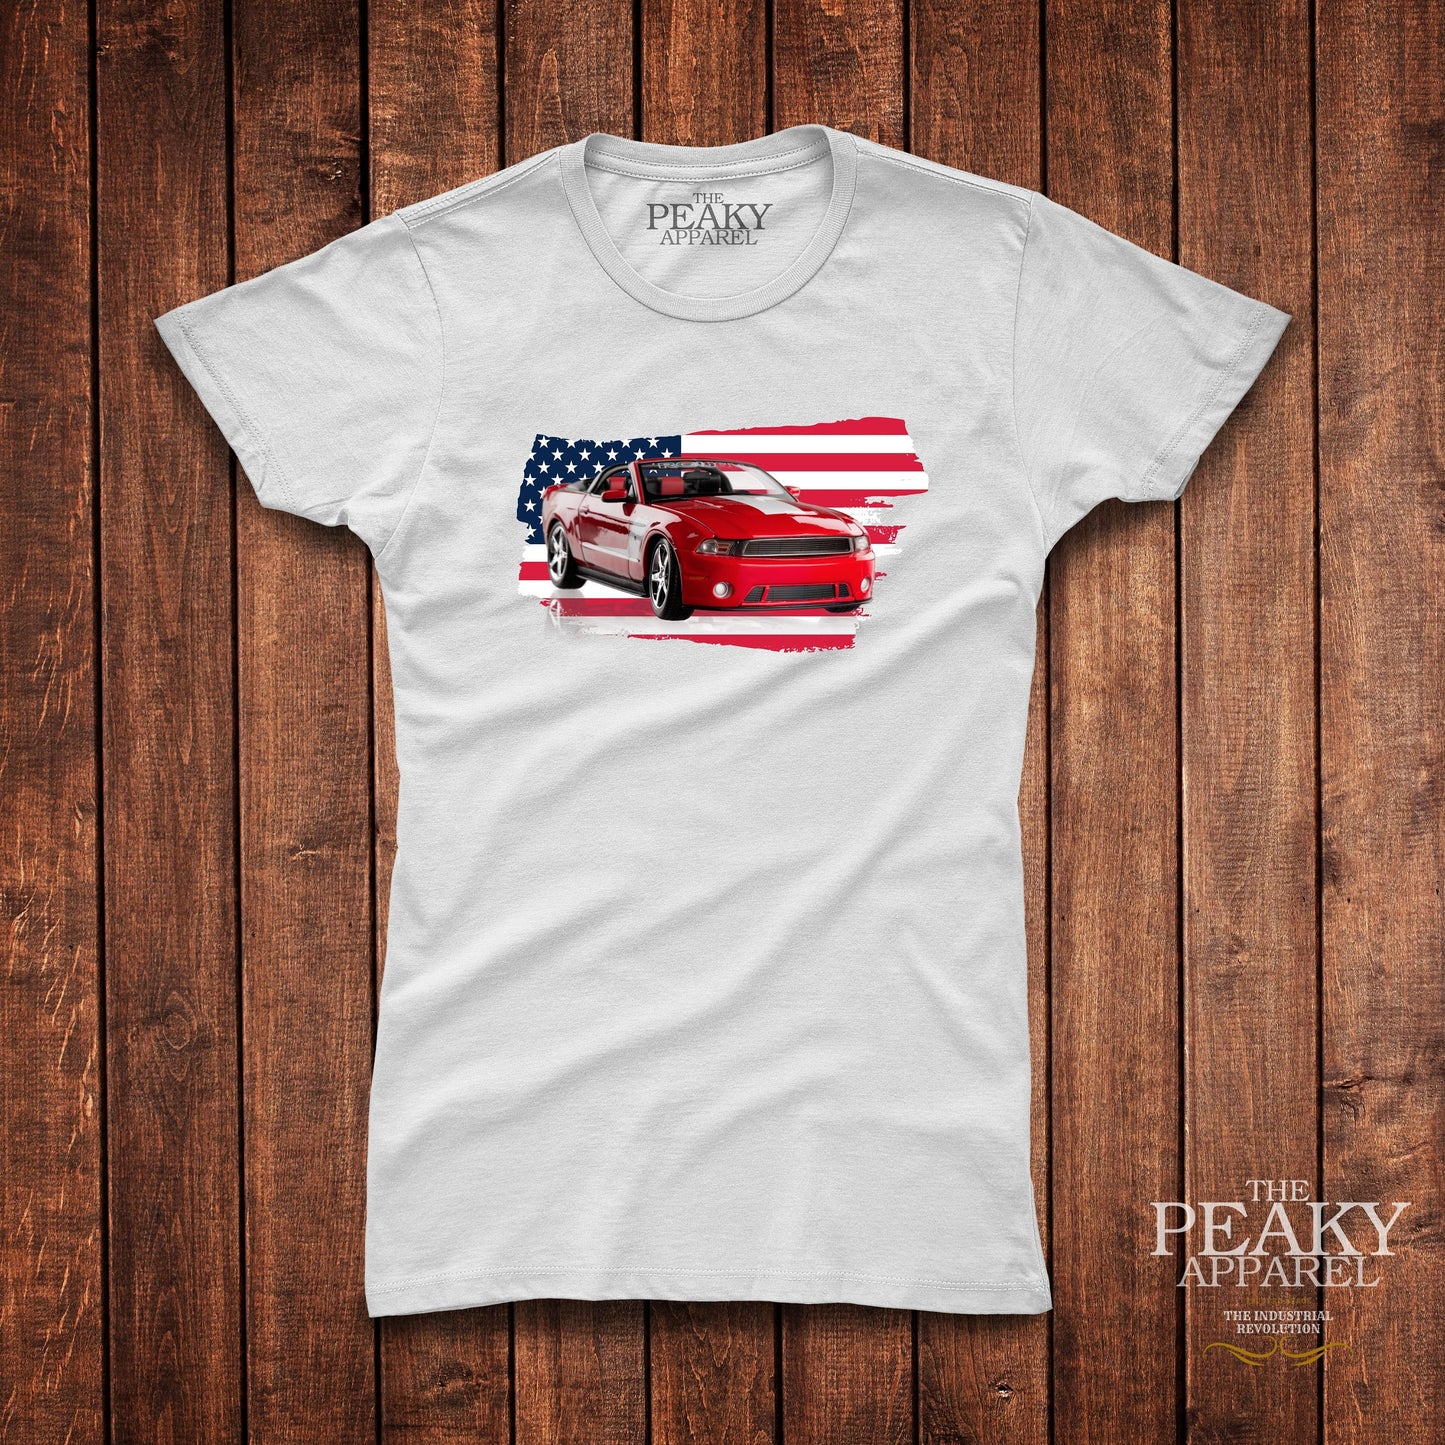 Super Car Ford Mustang USA Flag T-Shirt Womens Casual Black or White Design Soft Feel Lightweight Quality Material